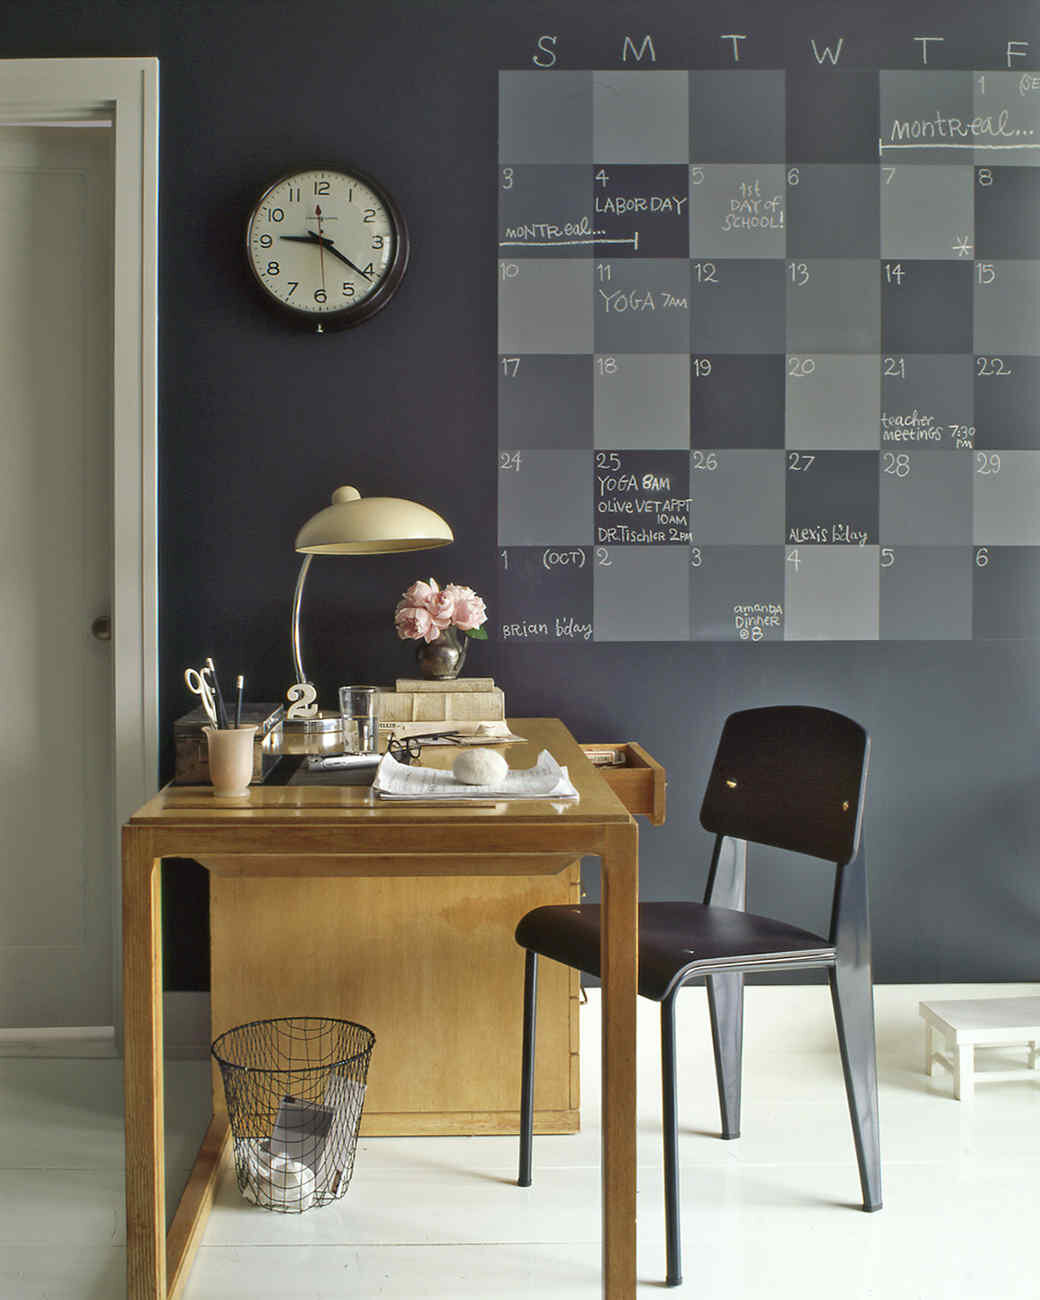 If you use different shades of paint, you too can create a super friendly wall calendar for the family.